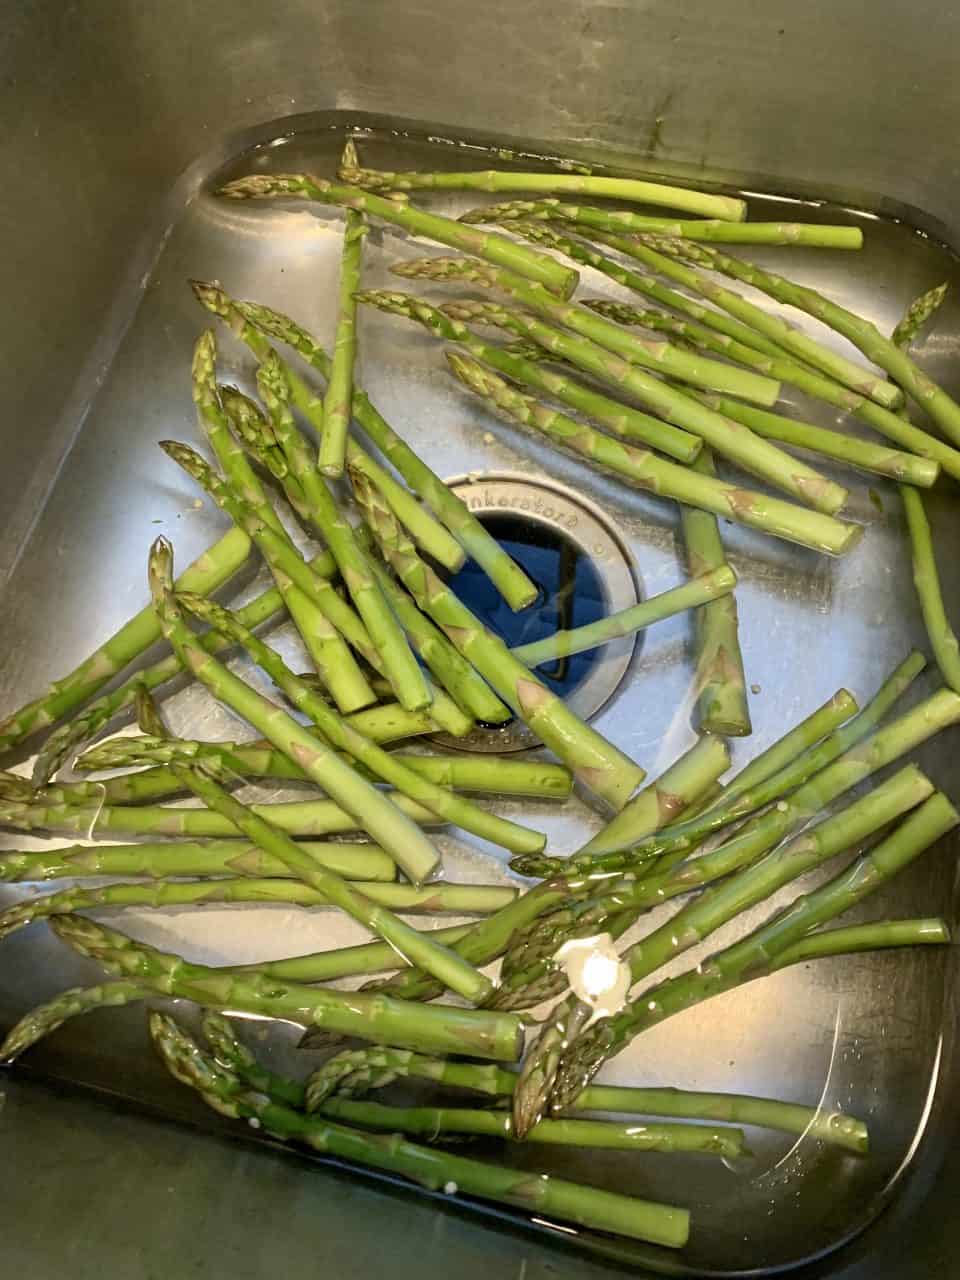 Asparagus getting rinsed in the sink